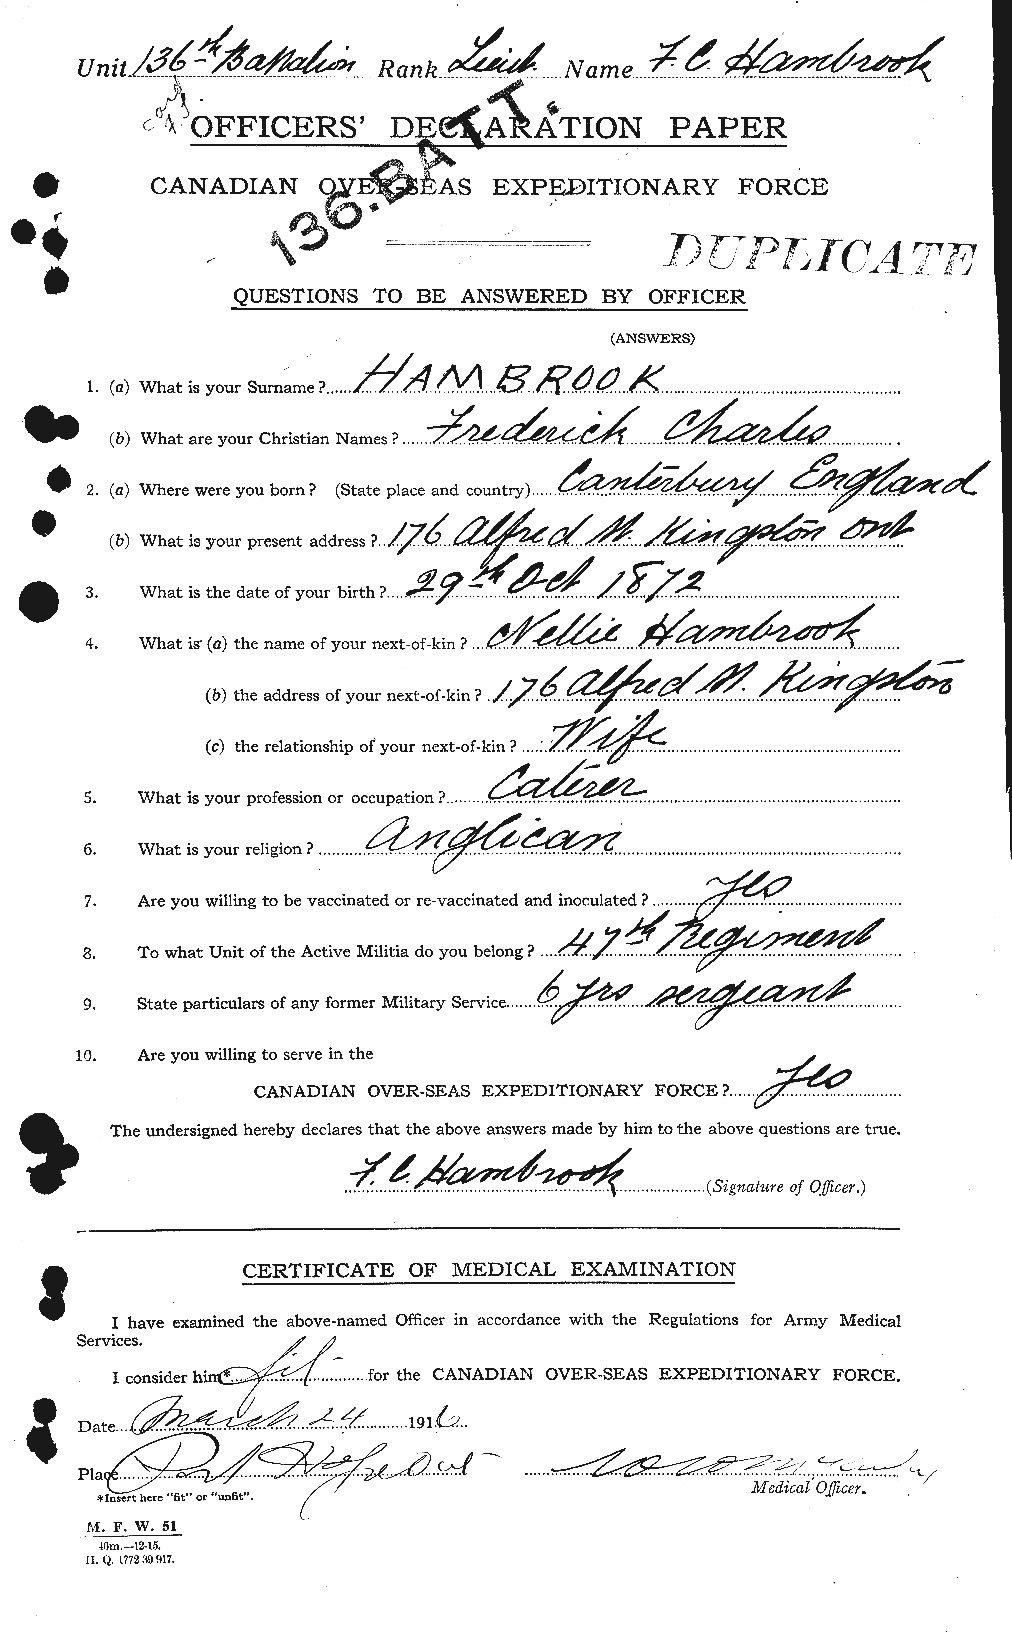 Personnel Records of the First World War - CEF 373845a